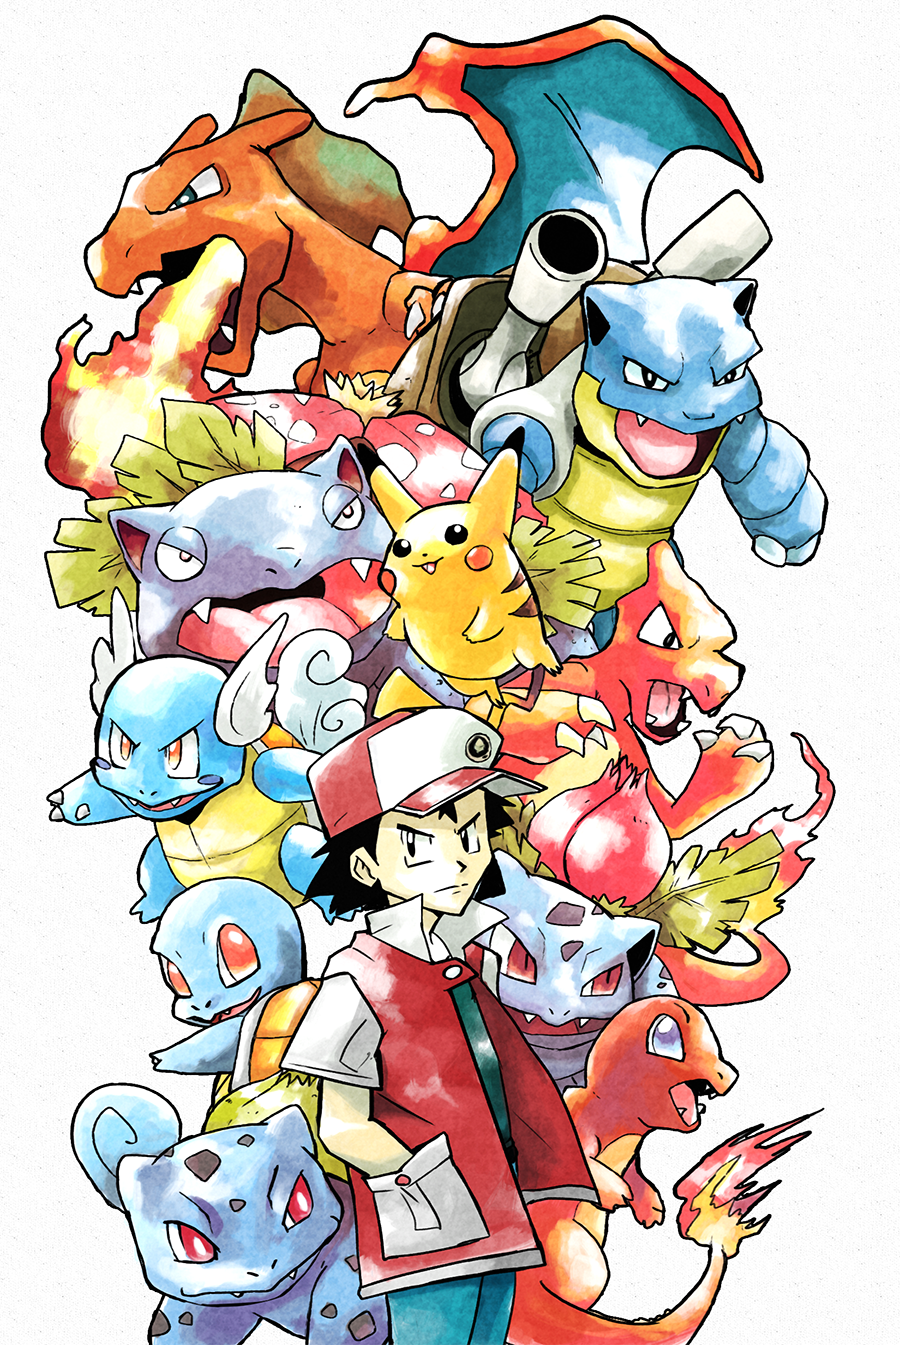 Red Pokemon by Foxeaf on